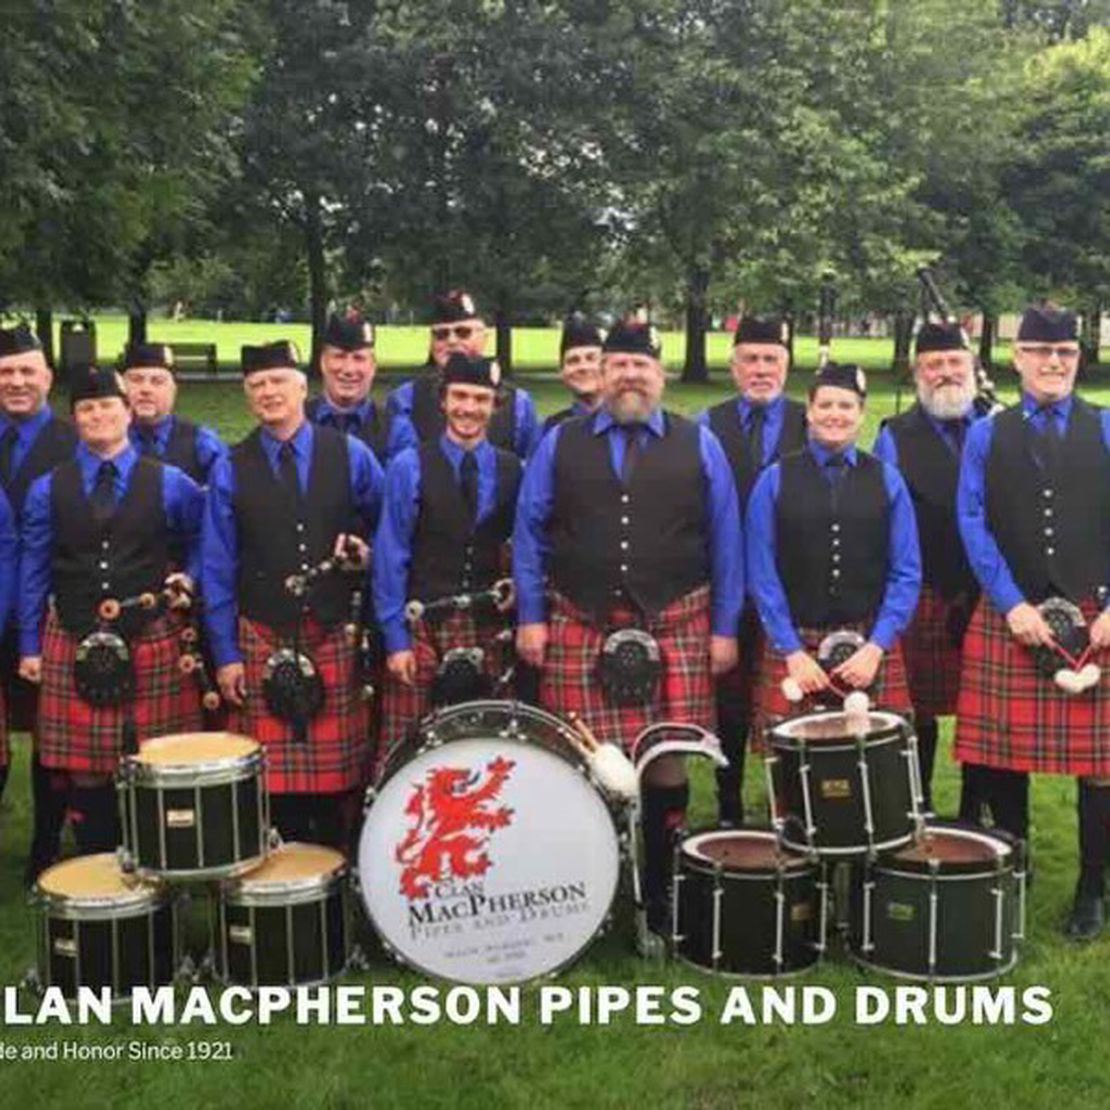 clan macpherson pipes and drums